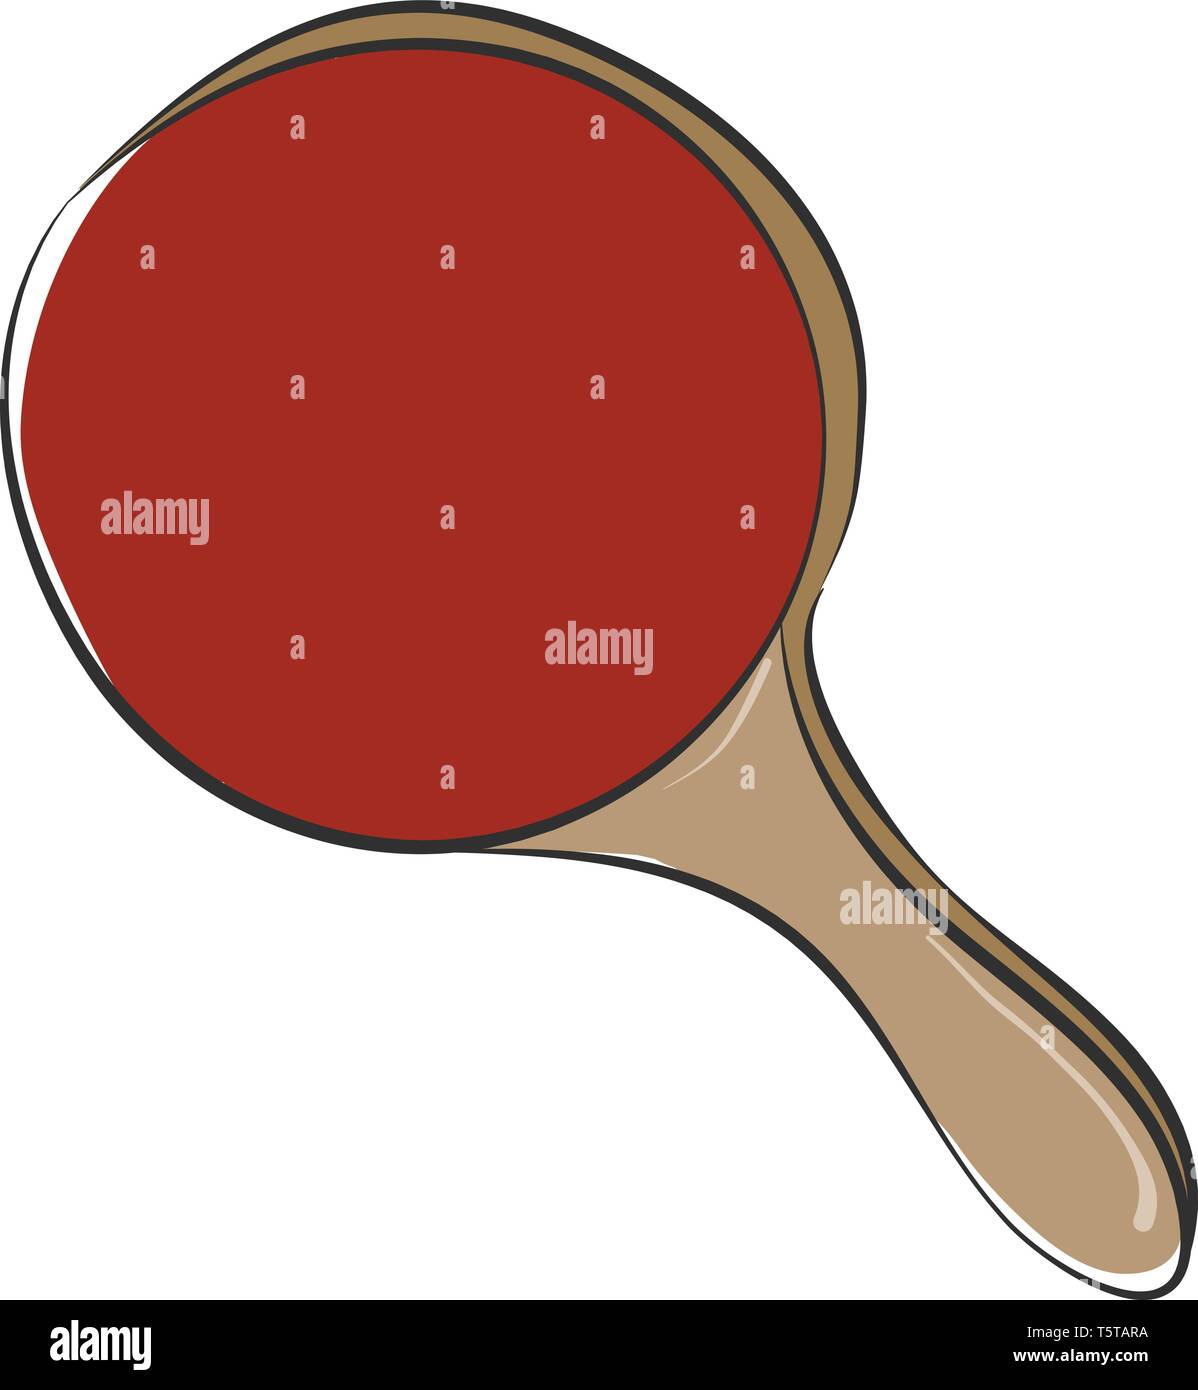 Clipart of a red table tennis racket with a brown handle is ready to hit a  tennis ball while played by the player vector color drawing or illustration  Stock Vector Image &